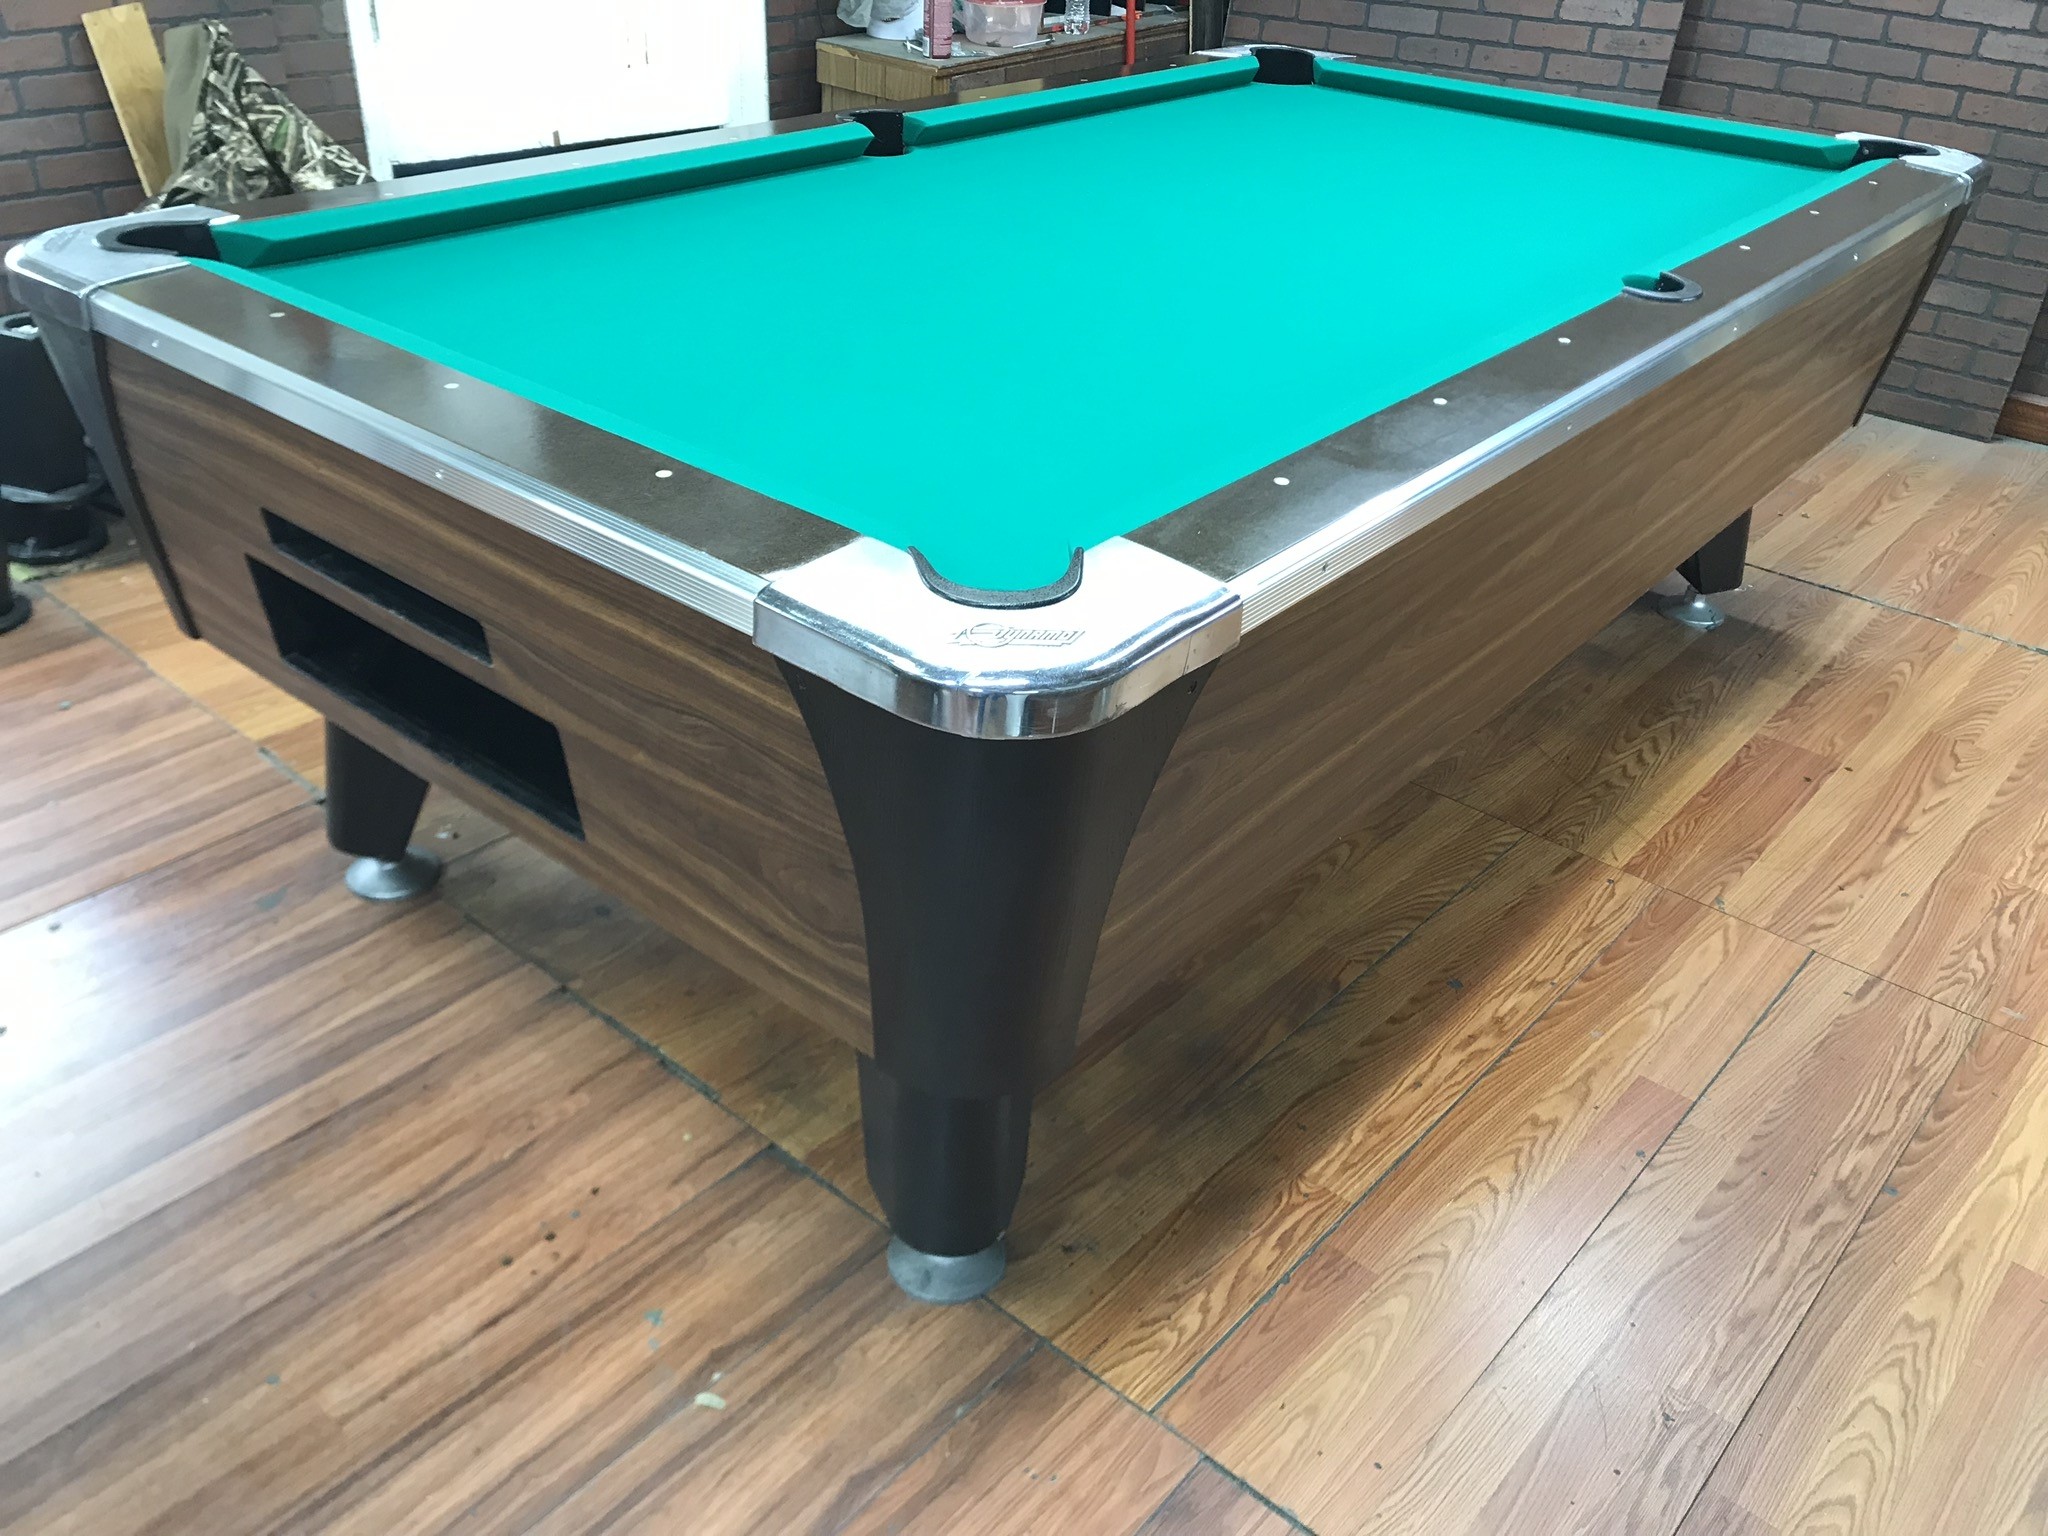 Sold 8 foot bar pool tables used coin operated bar